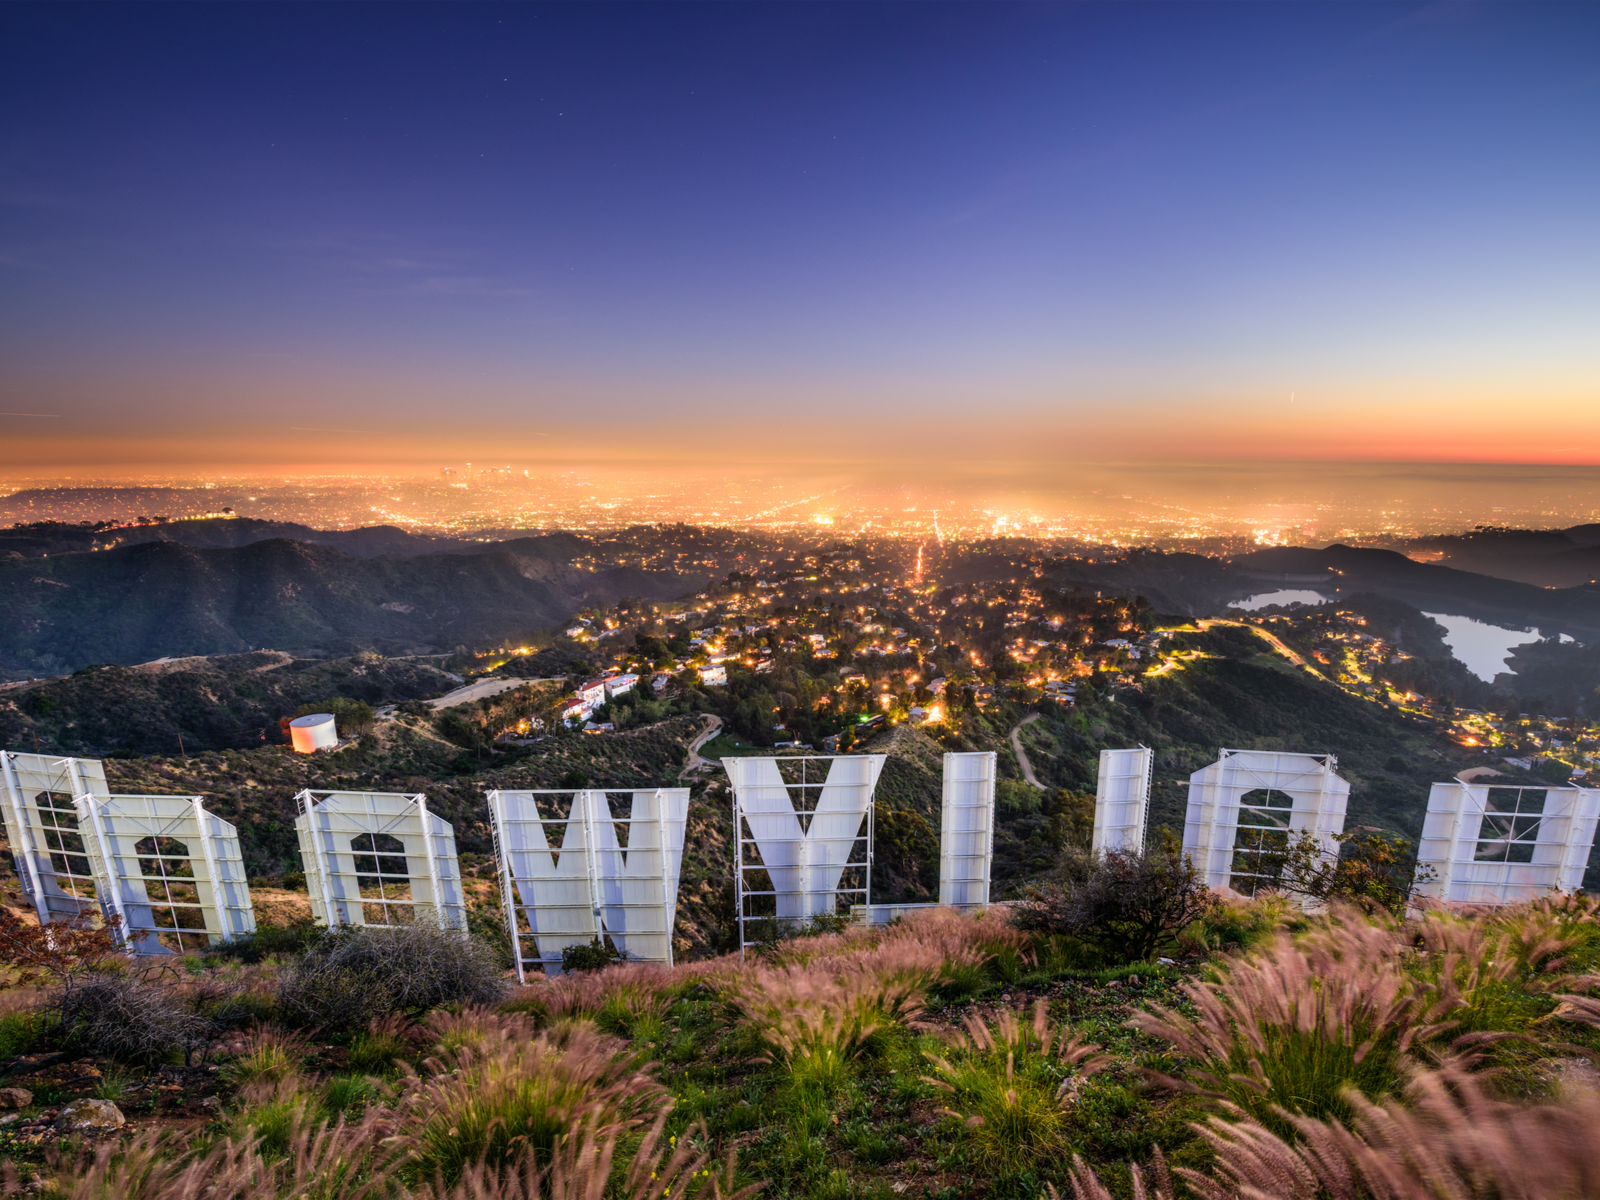 Up-close view of the iconic Hollywood sign, one of the best things to do in California, overlooking the city lights of Los Angeles